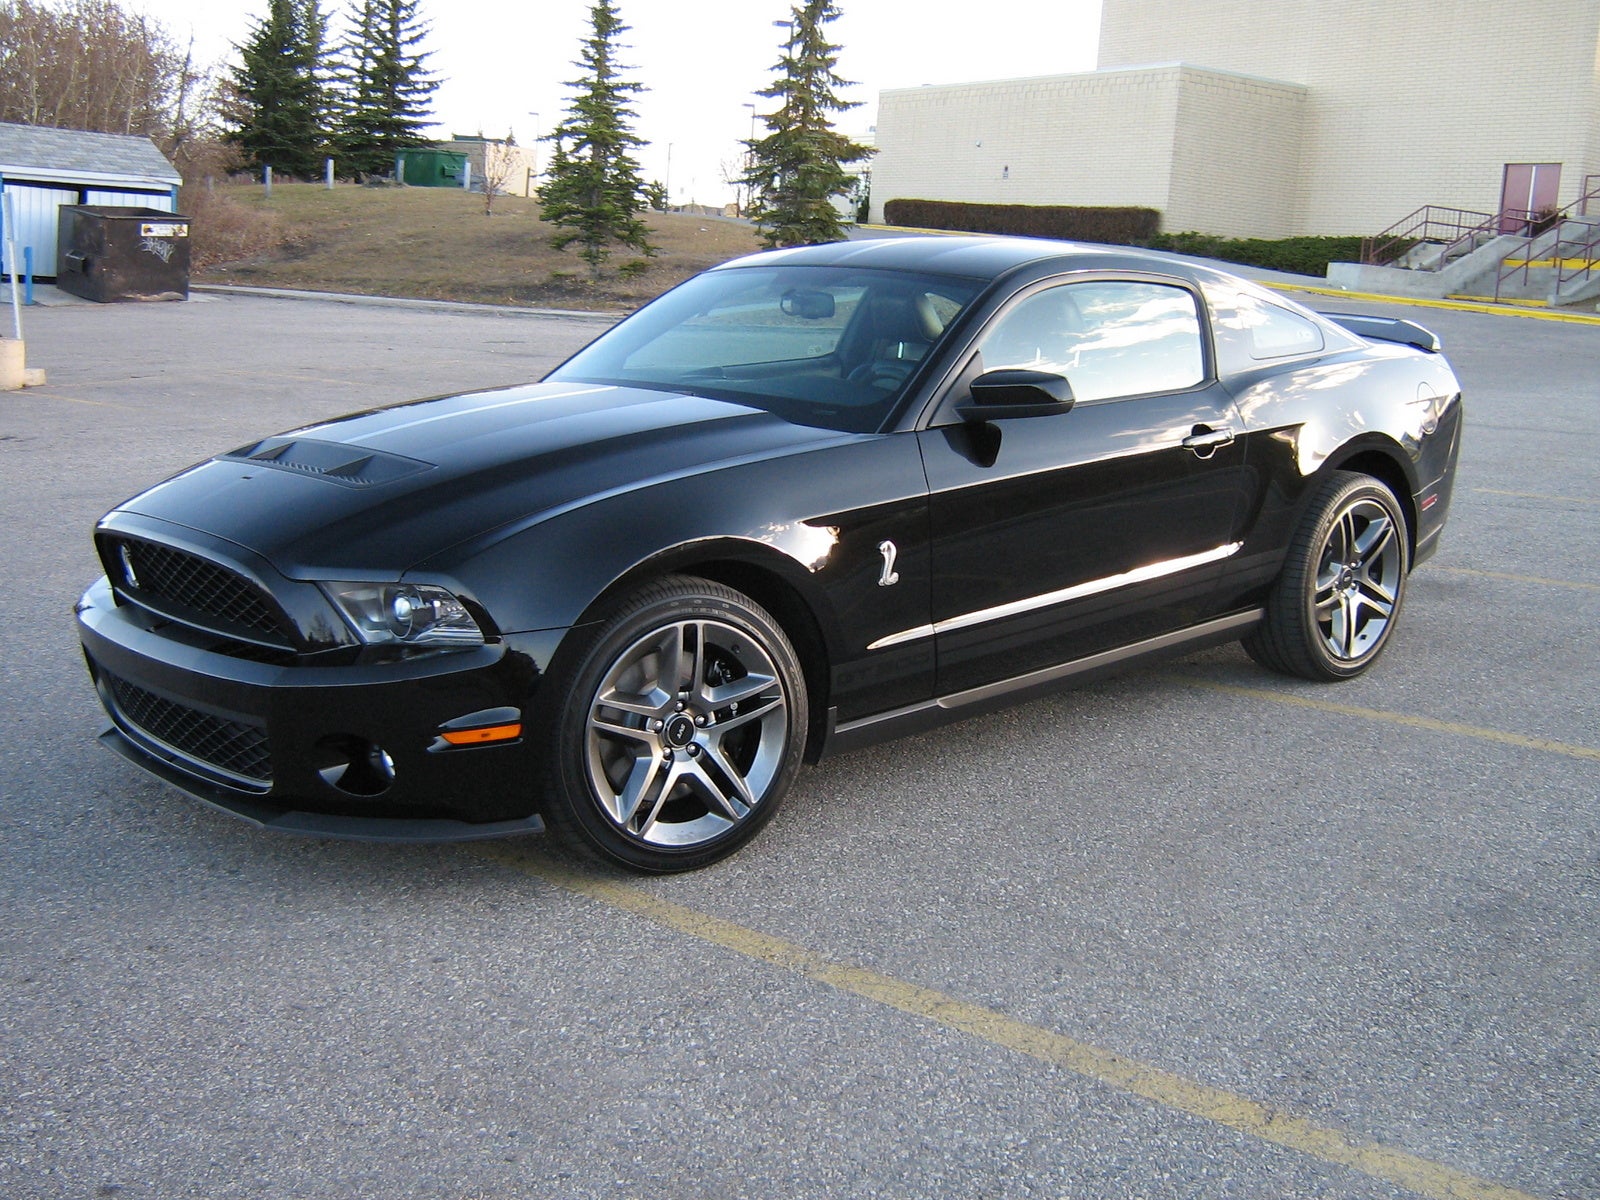 2010 Ford shelby gt500 specs #6